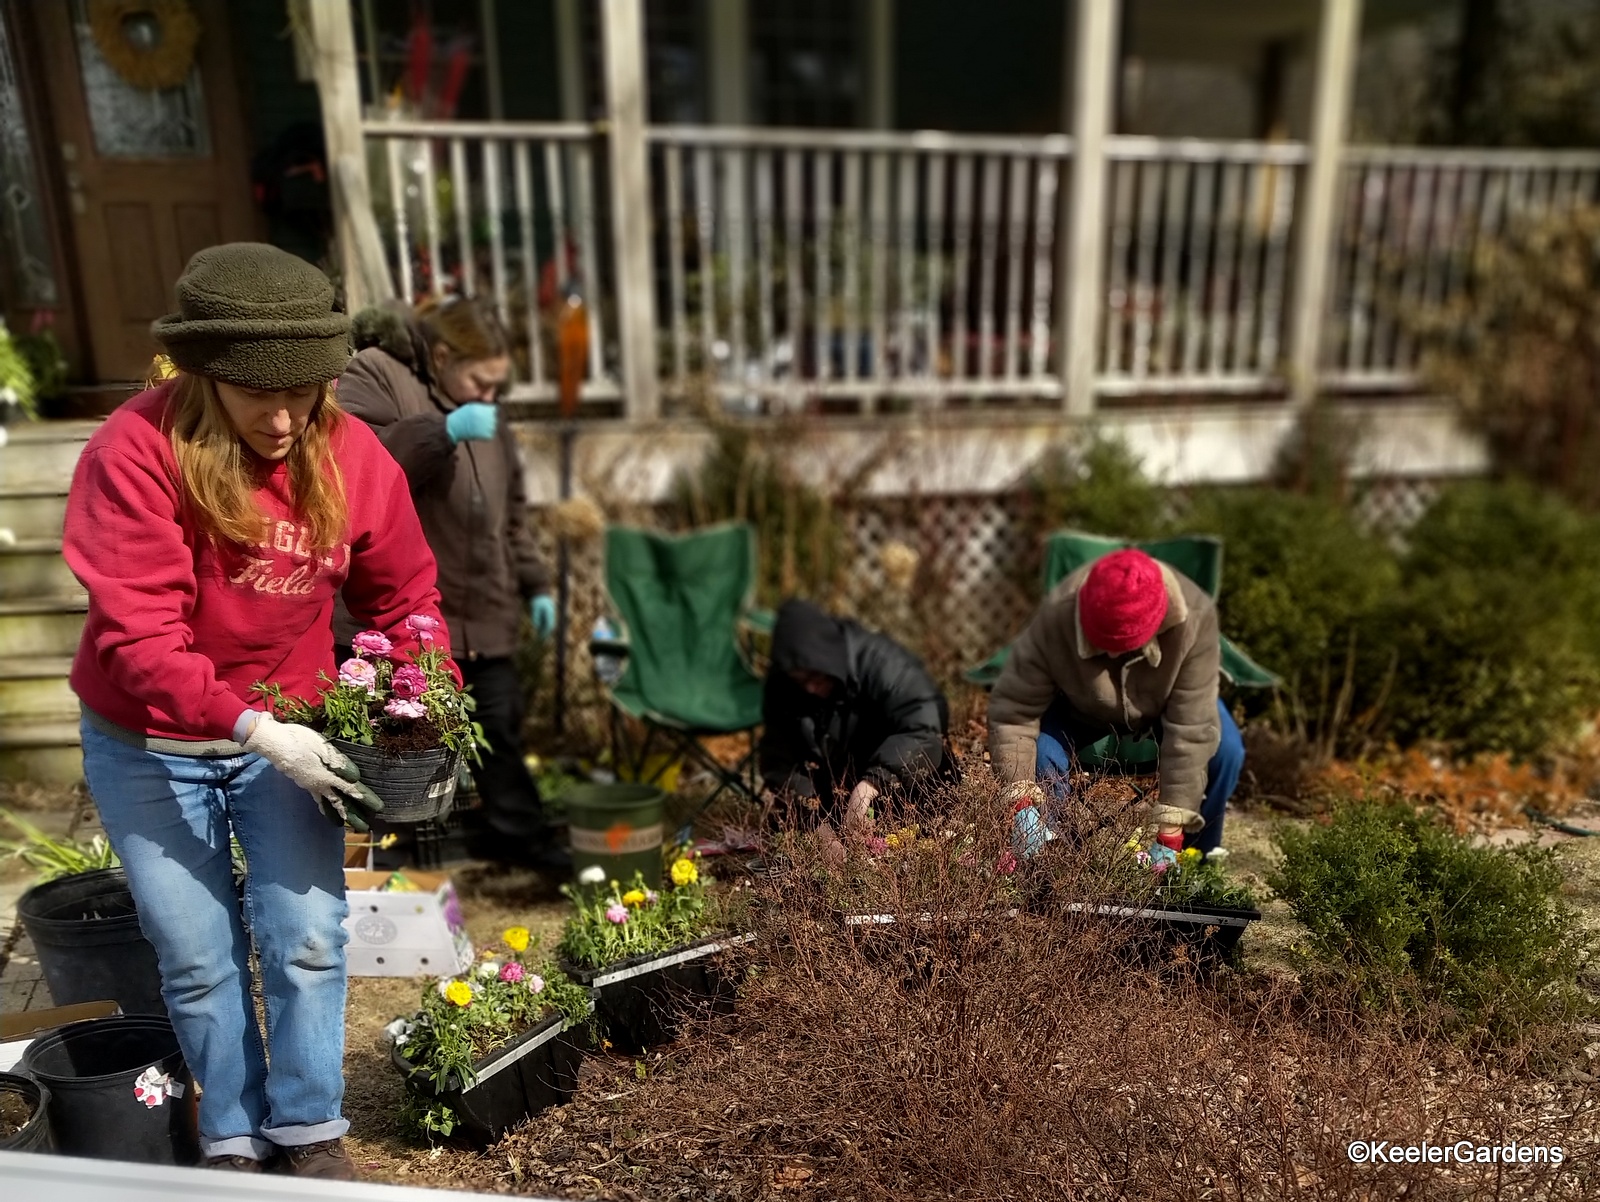 Gina, the lead horticulturist specialist, is in the foreground holding a ranunculus as volunteers sit and neel in the background over pots they are planting with bulbs and other plants.